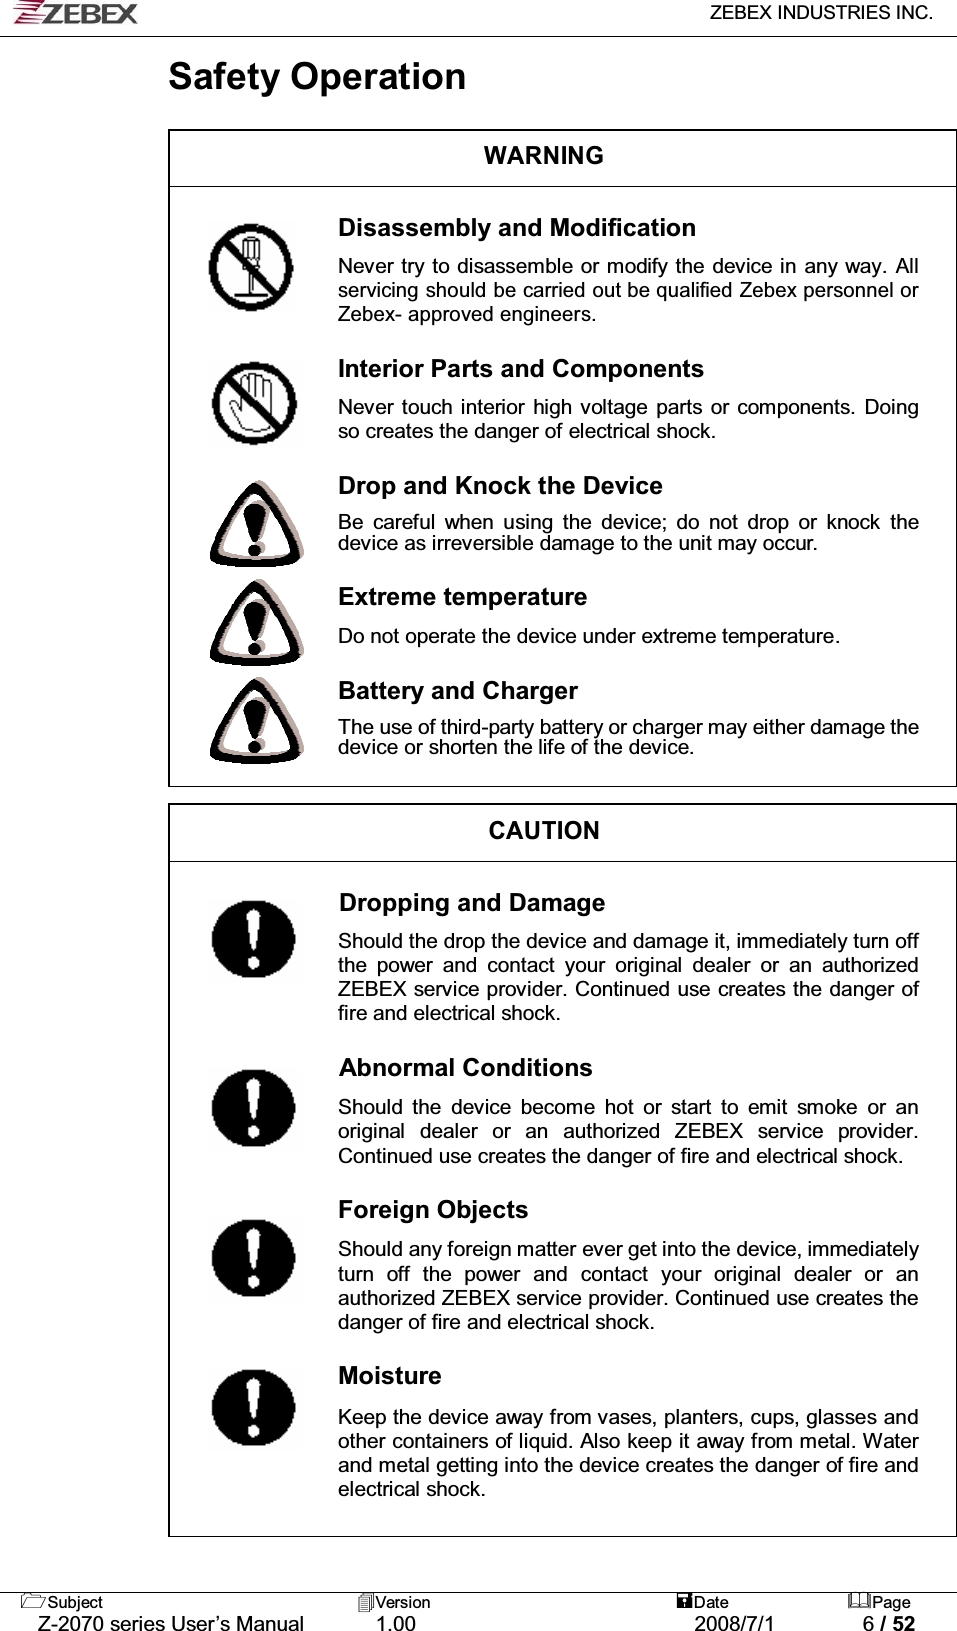   ZEBEX INDUSTRIES INC.   Subject Version  Date Page   Z-2070 series User’s Manual  1.00  2008/7/1  6 / 52 Safety Operation  WARNING  Disassembly and Modification  Never try to disassemble or modify the device in any way. All servicing should be carried out be qualified Zebex personnel or Zebex- approved engineers.  Interior Parts and Components  Never touch interior high voltage parts or components. Doing so creates the danger of electrical shock.  Drop and Knock the Device  Be careful when using the device; do not drop or knock the device as irreversible damage to the unit may occur.  Extreme temperature  Do not operate the device under extreme temperature.  Battery and Charger  The use of third-party battery or charger may either damage the device or shorten the life of the device.   CAUTION  Dropping and Damage  Should the drop the device and damage it, immediately turn off the power and contact your original dealer or an authorized ZEBEX service provider. Continued use creates the danger of fire and electrical shock.  Abnormal Conditions                Should the device become hot or start to emit smoke or an original dealer or an authorized ZEBEX service provider. Continued use creates the danger of fire and electrical shock.  Foreign Objects  Should any foreign matter ever get into the device, immediately turn off the power and contact your original dealer or an authorized ZEBEX service provider. Continued use creates the danger of fire and electrical shock.  Moisture  Keep the device away from vases, planters, cups, glasses and other containers of liquid. Also keep it away from metal. Water and metal getting into the device creates the danger of fire and electrical shock.         